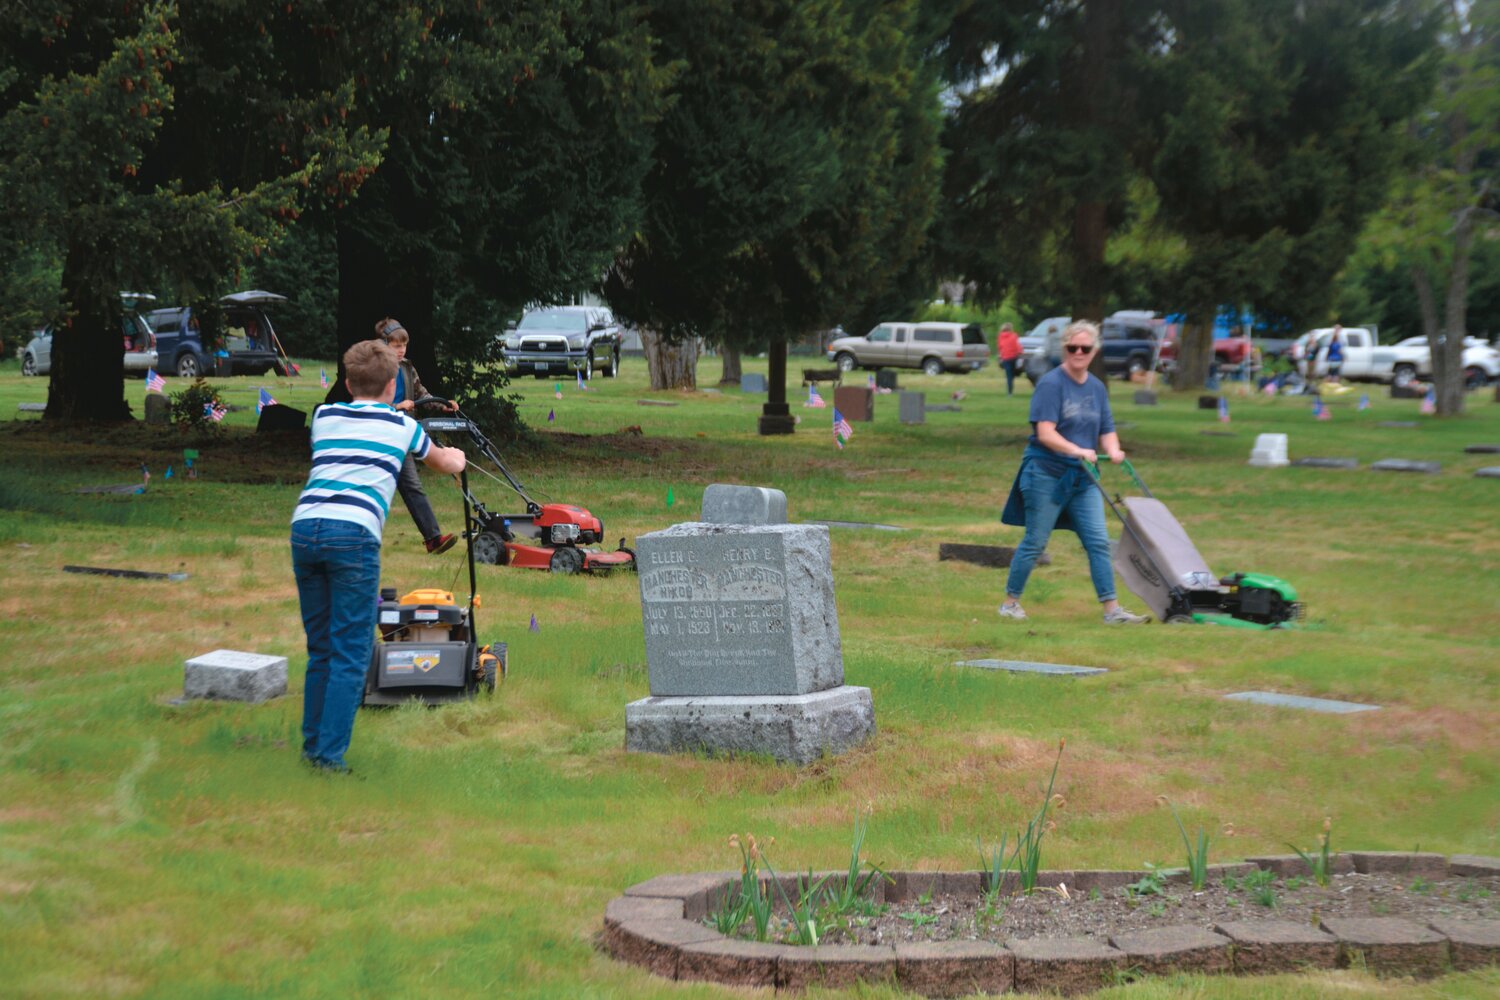 Volunteers make their rounds with lawn mowers at the Roy Cemetery during a cleanup day event on Sunday, May 21.